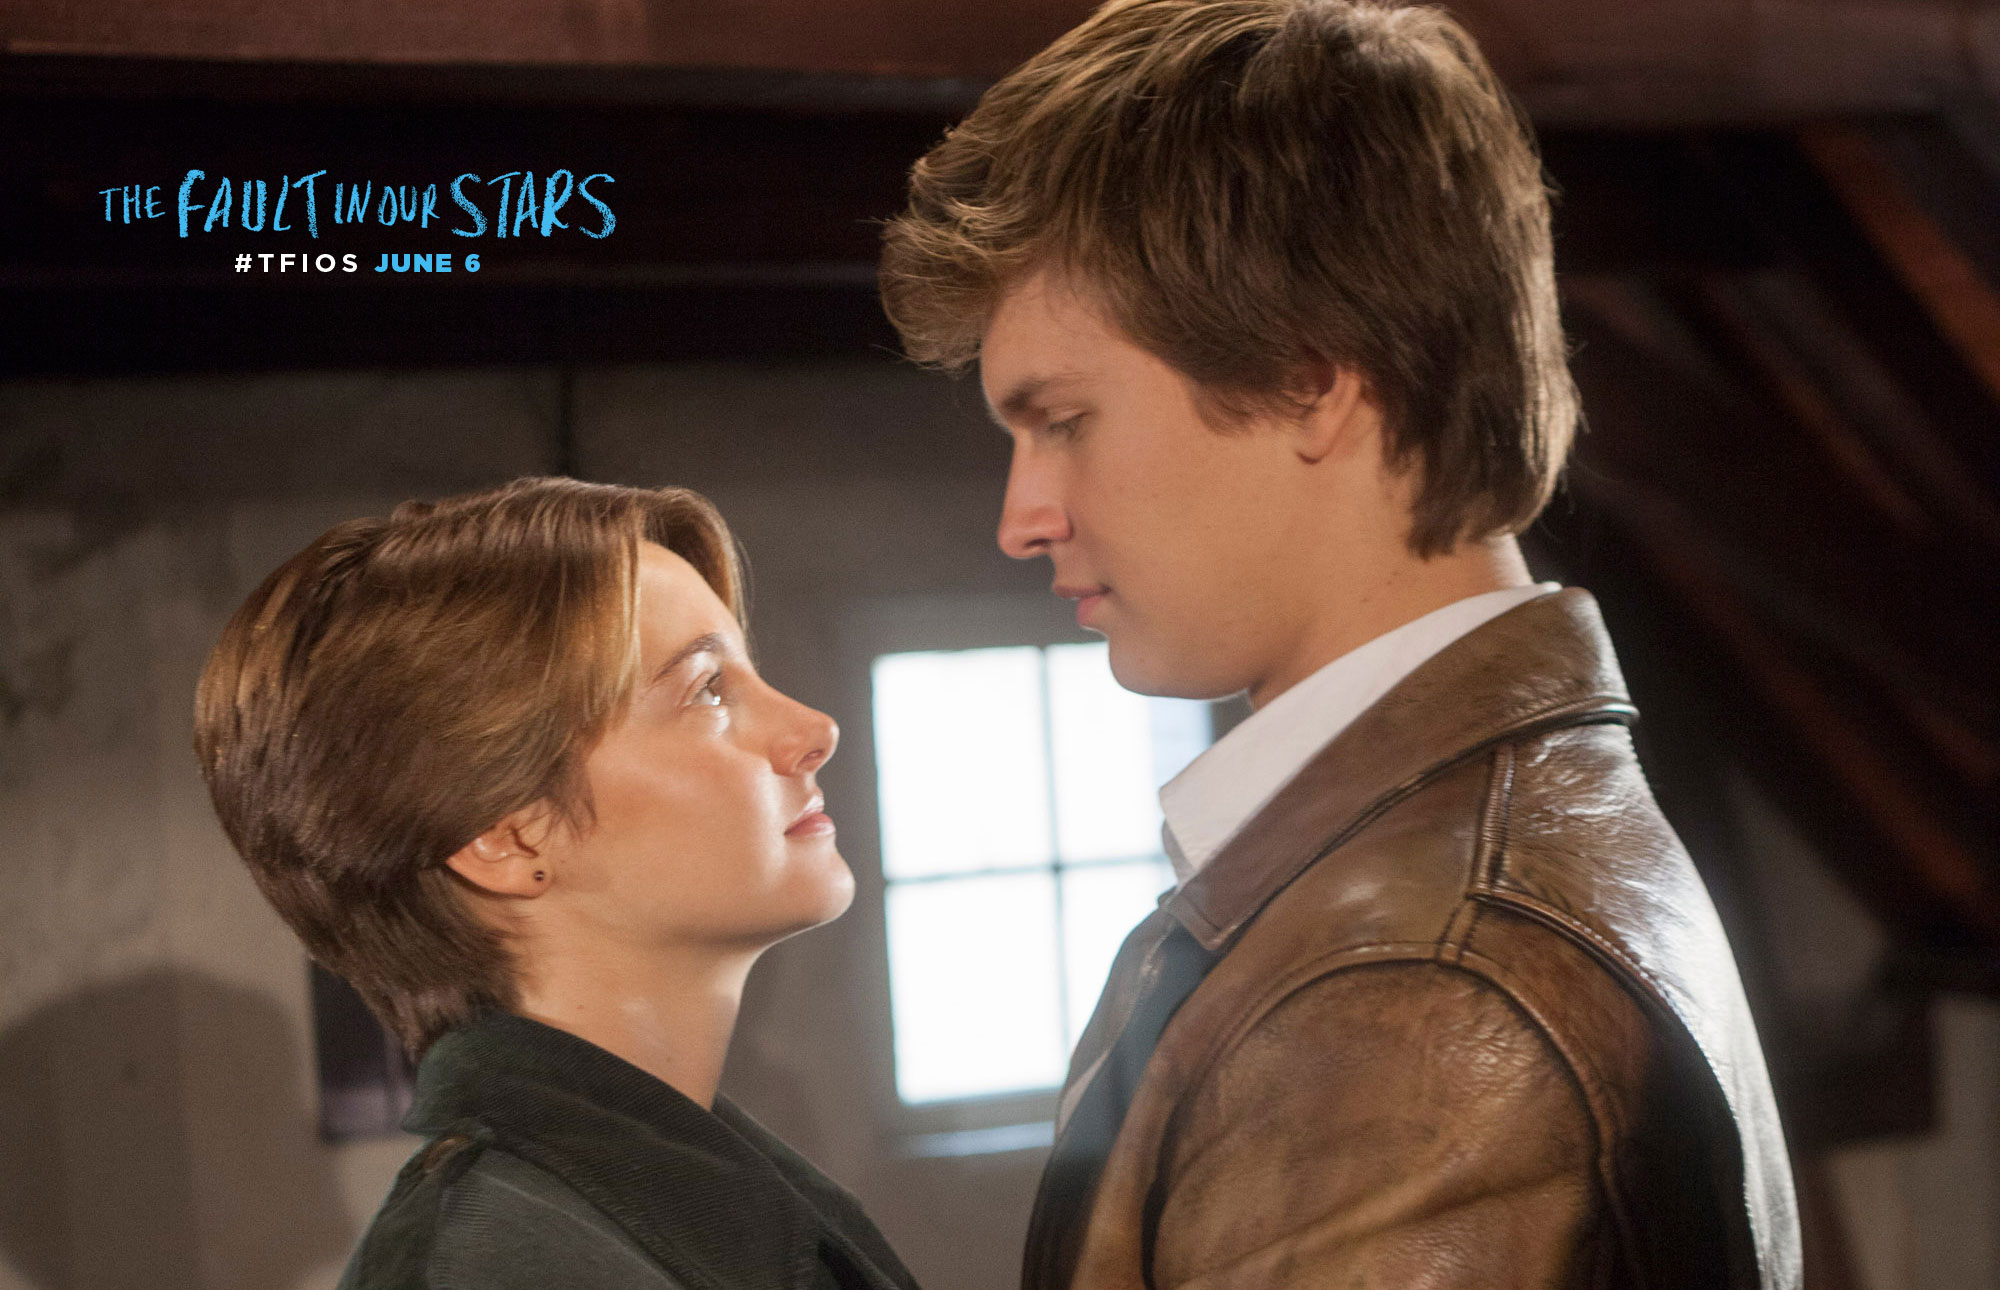 the fault in our stars full movie free download